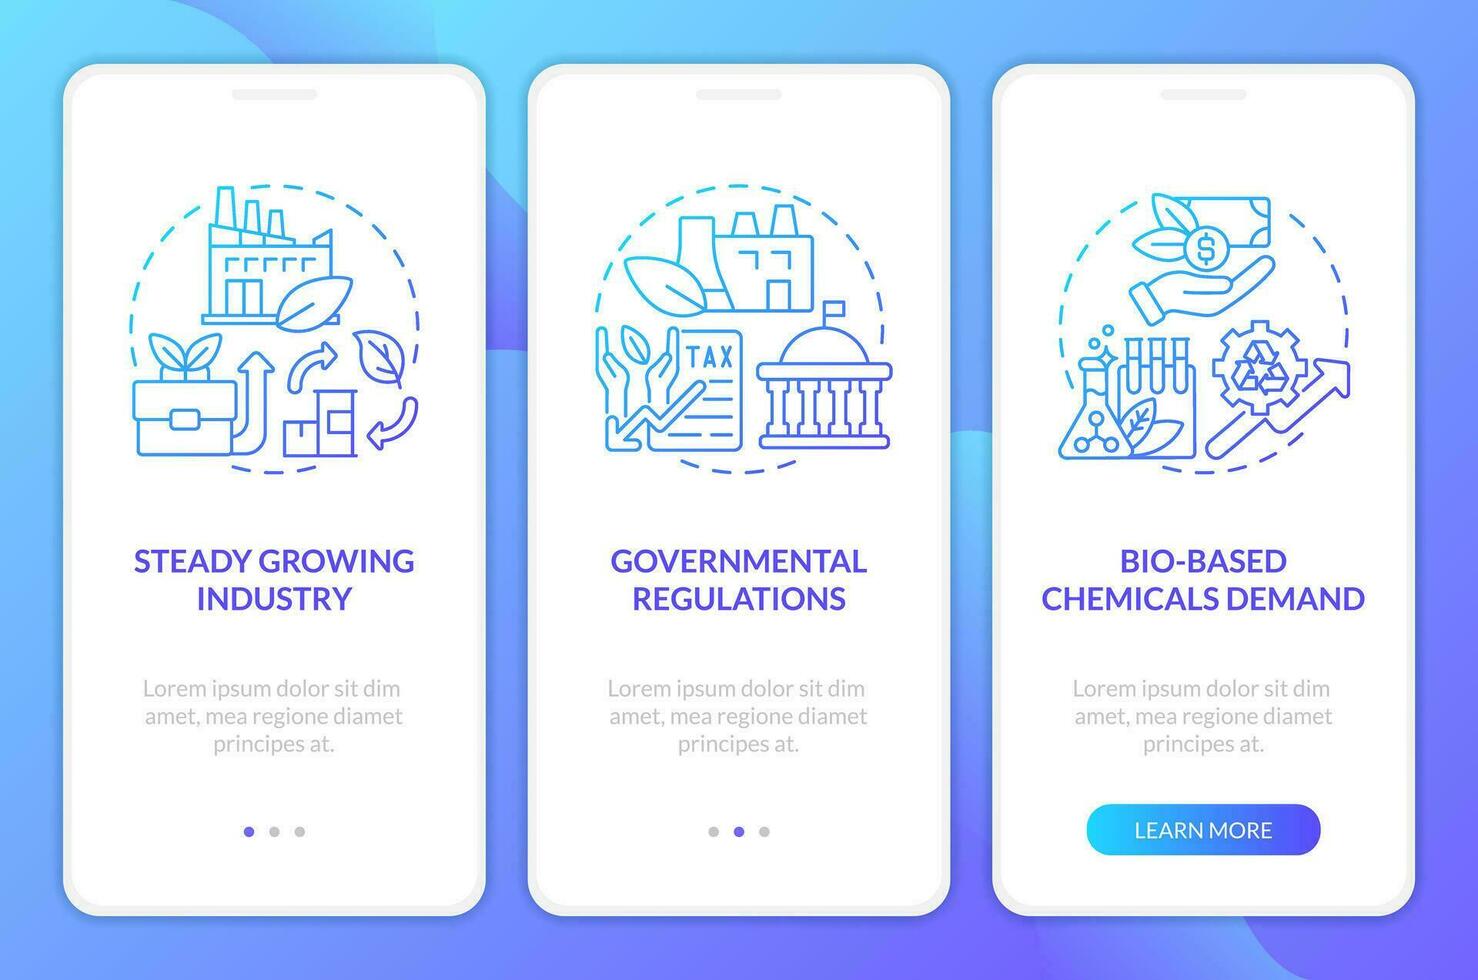 Biobased materials future blue gradient onboarding mobile app screen. Walkthrough 3 steps graphic instructions with linear concepts. UI, UX, GUI templated vector